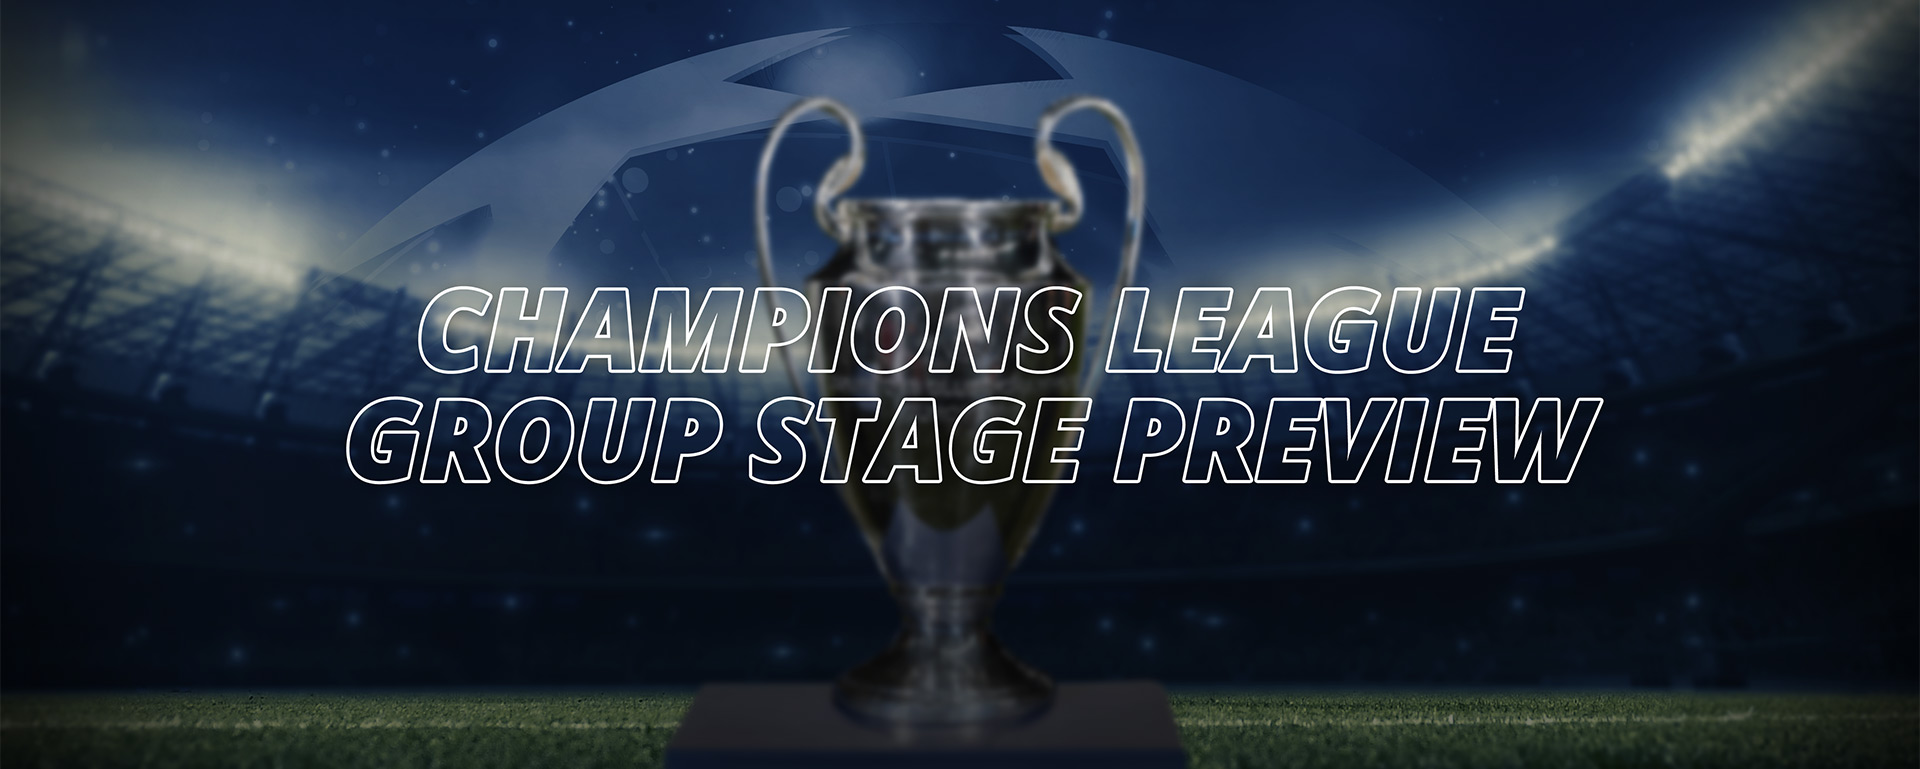 CHAMPIONS LEAGUE GROUP STAGE PREVIEW